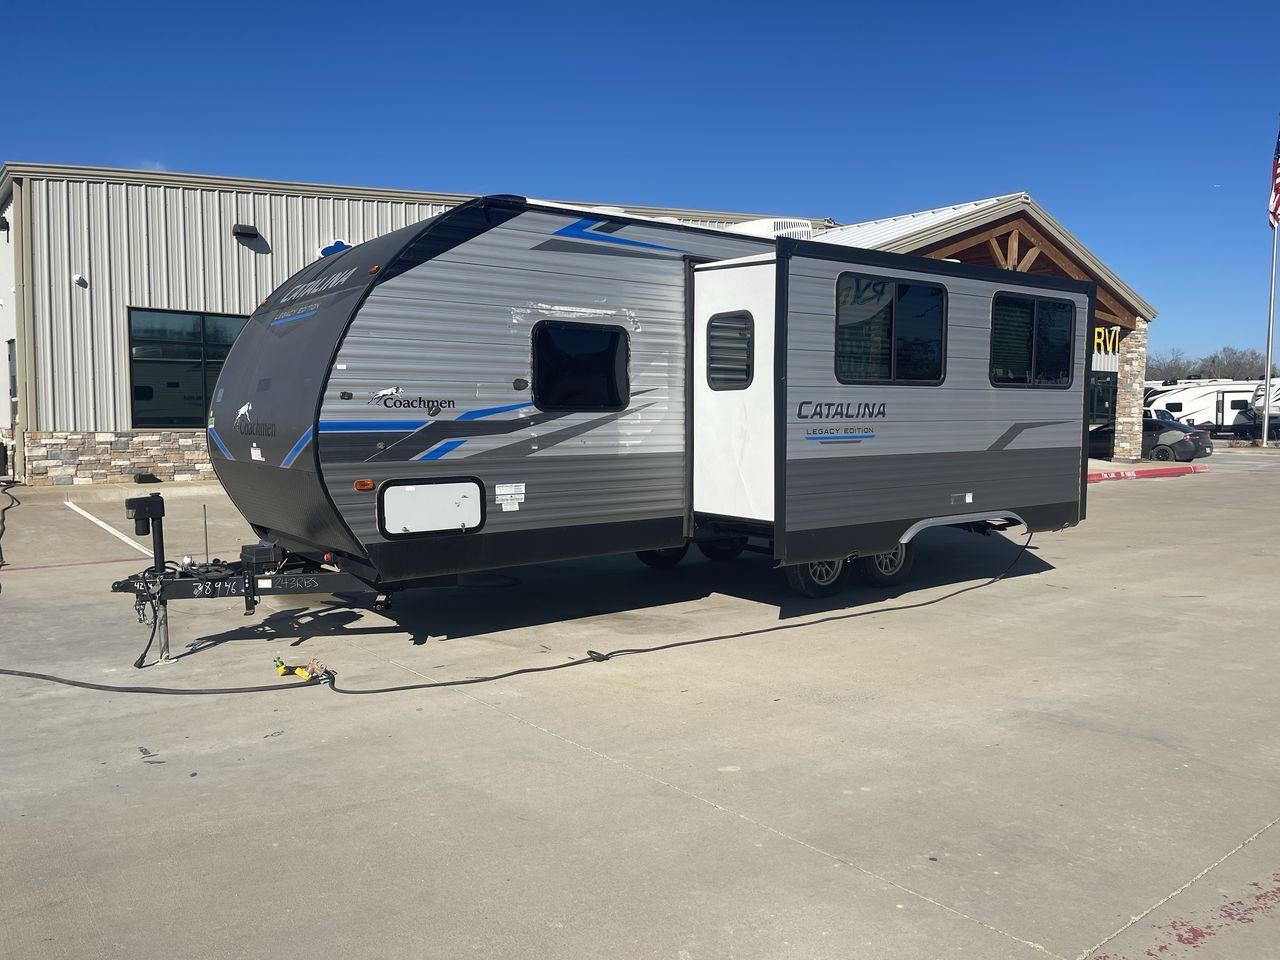 2021 COACHMEN CATALINA 243RBS (5ZT2CANBXMU) , Length: 28.75 ft. | Dry Weight: 5,692 lbs. | Gross Weight: 7,600 lbs. | Slides: 1 transmission, located at 4319 N Main St, Cleburne, TX, 76033, (817) 678-5133, 32.385960, -97.391212 - The 2021 Forest River Catalina 243RBS travel trailer offers a spacious floorplan that is truly comfortable and convenient. As you enter the trailer, you will find a cozy front bedroom with a lovely queen bed where you can relax and rejuvenate yourself after enjoying the great outdoors. You also have - Photo #24